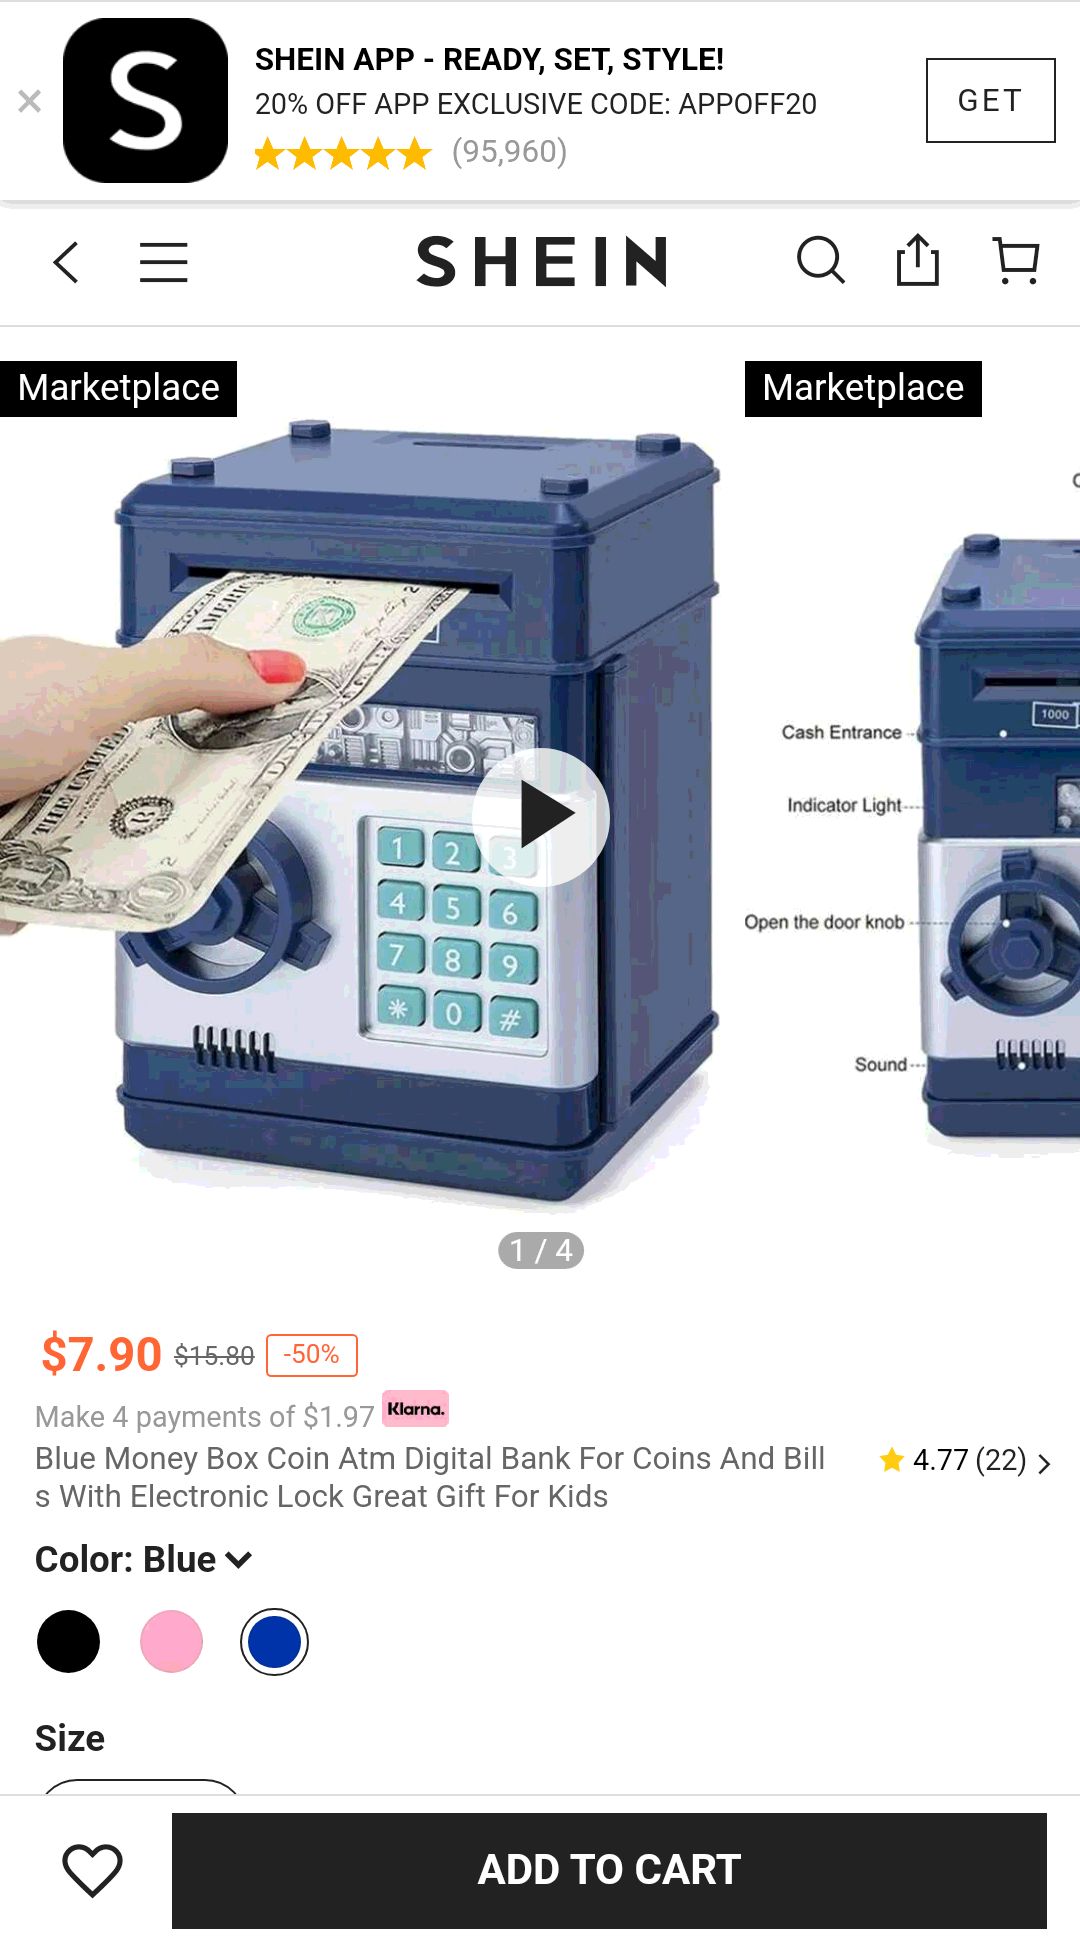 Blue Money Box Coin Atm Digital Bank For Coins And Bills With Electronic Lock Great Gift For Kids | SHEIN USA